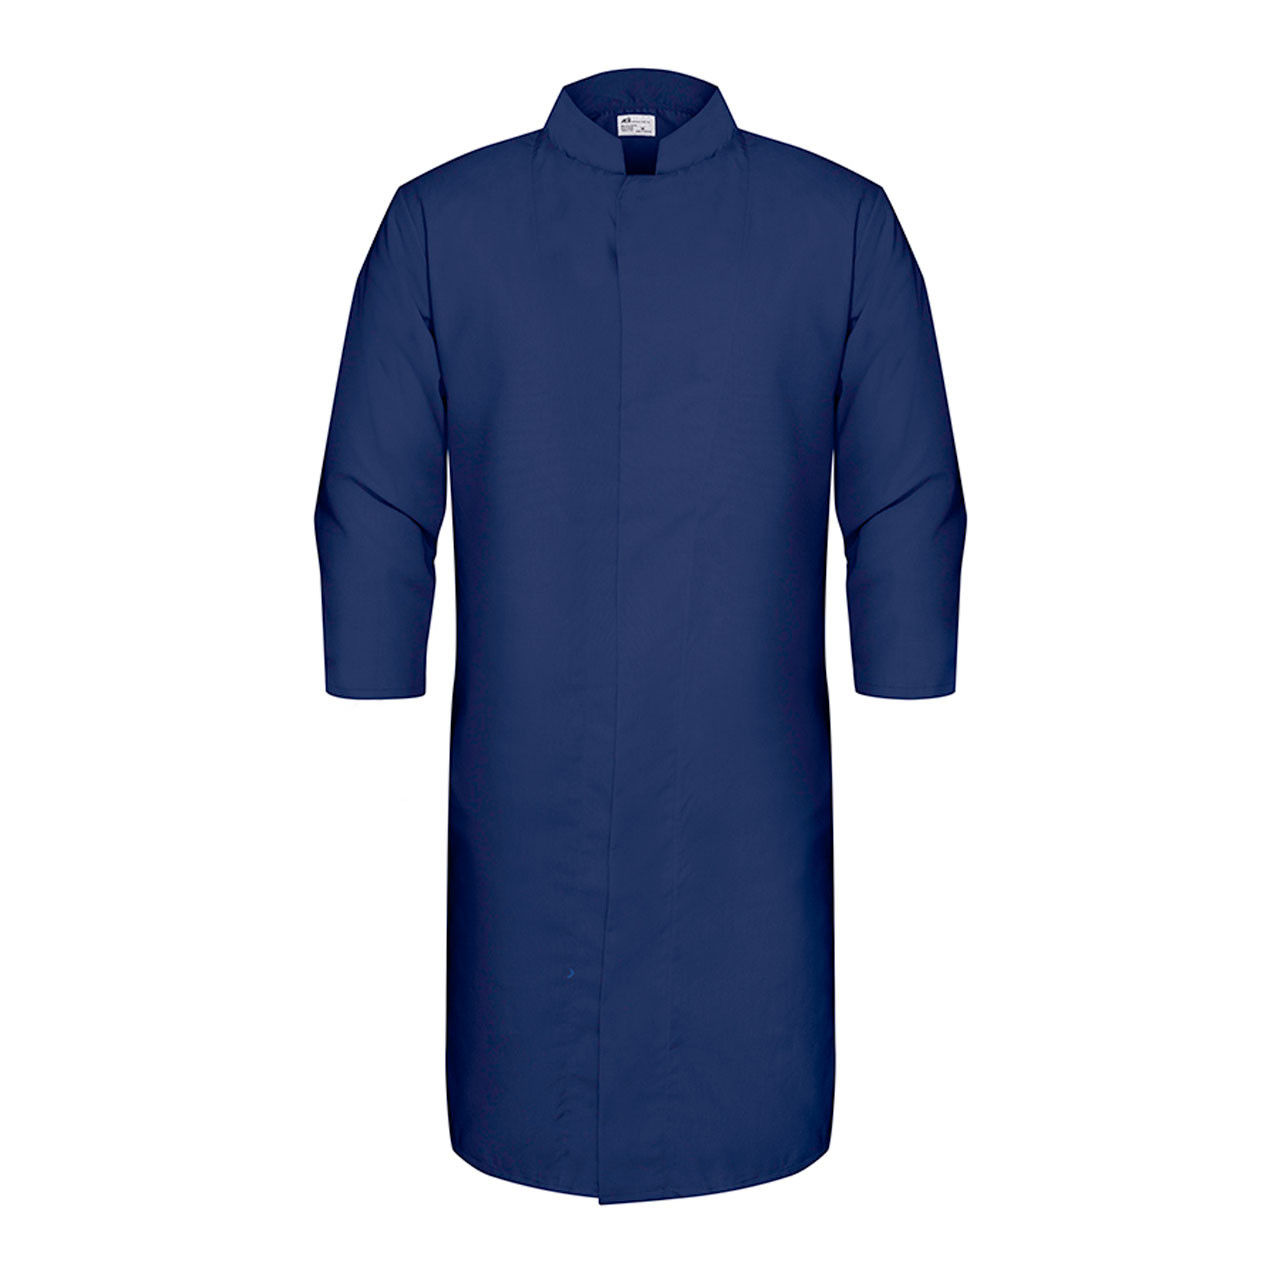 HACCP Lab Coat, Navy Blue Questions & Answers